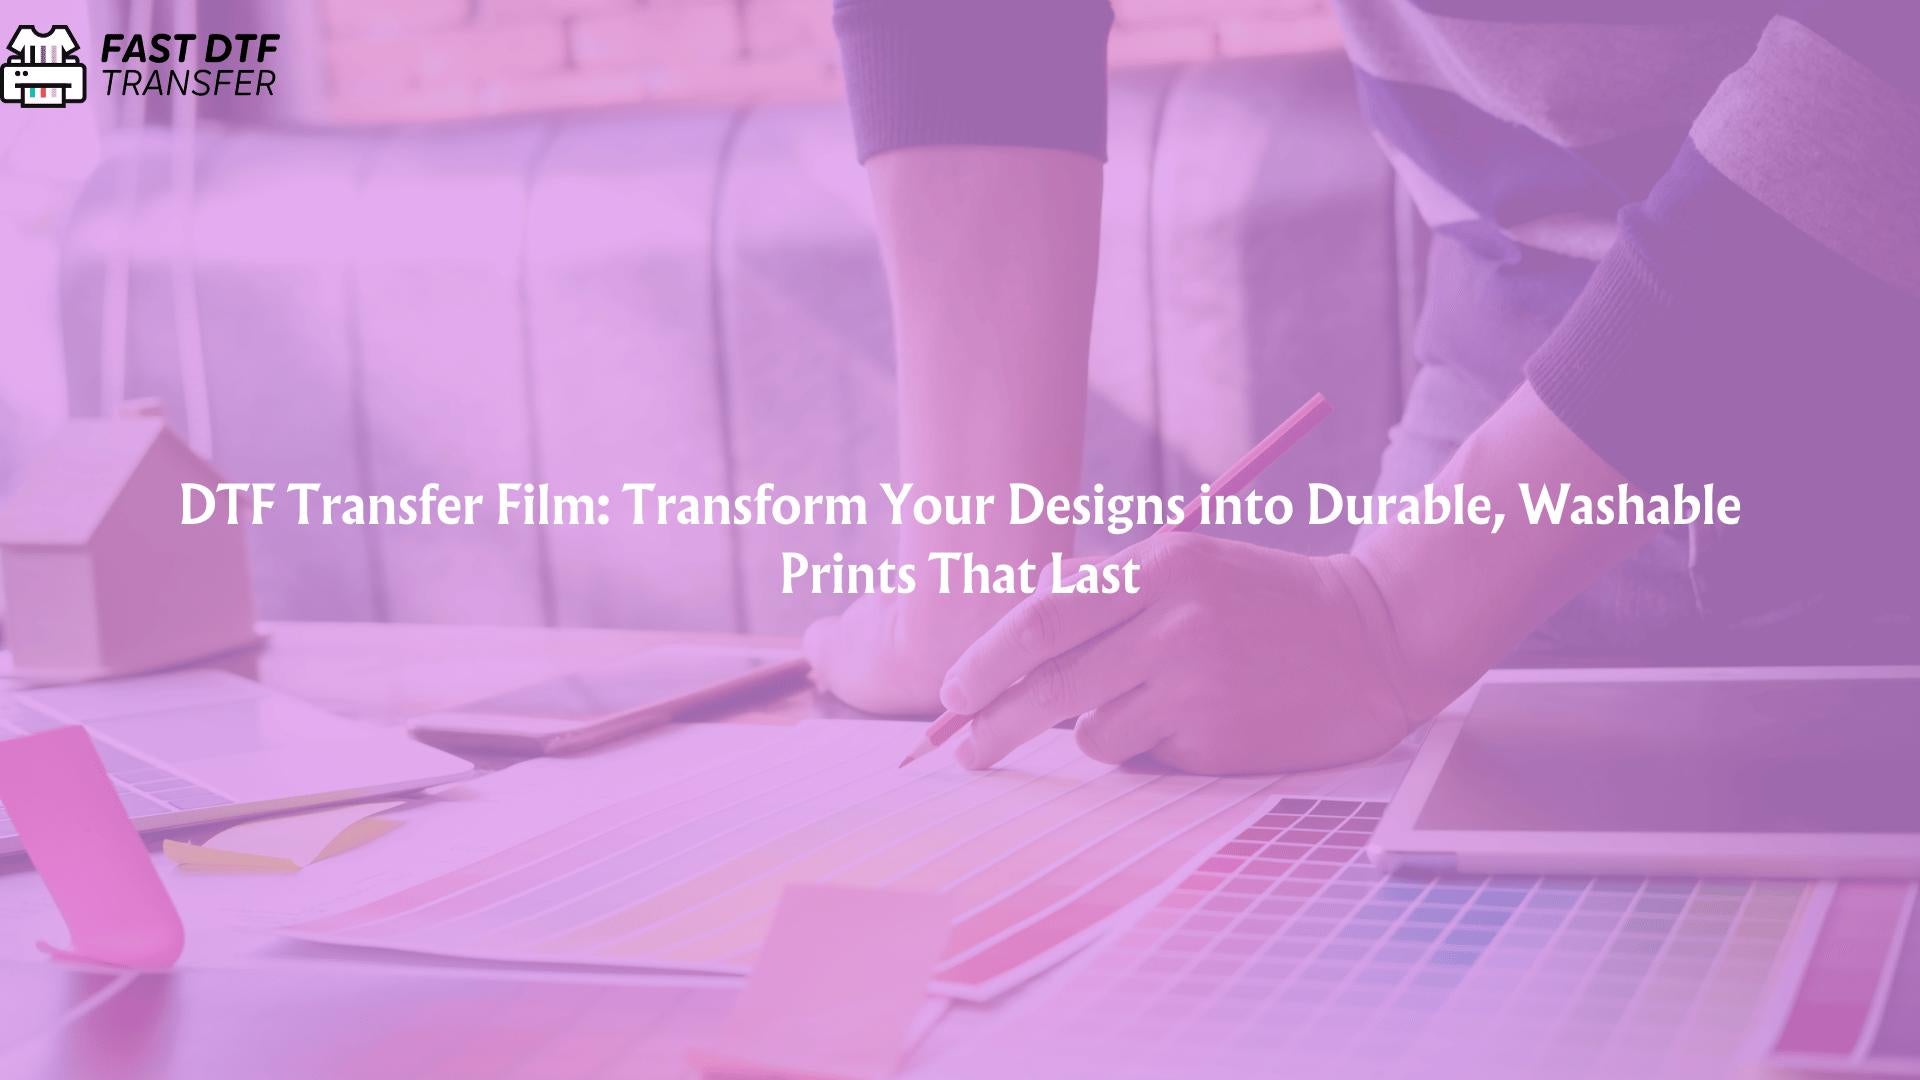 DTF Transfer Film: Transform Your Designs into Durable, Washable Prints That Last